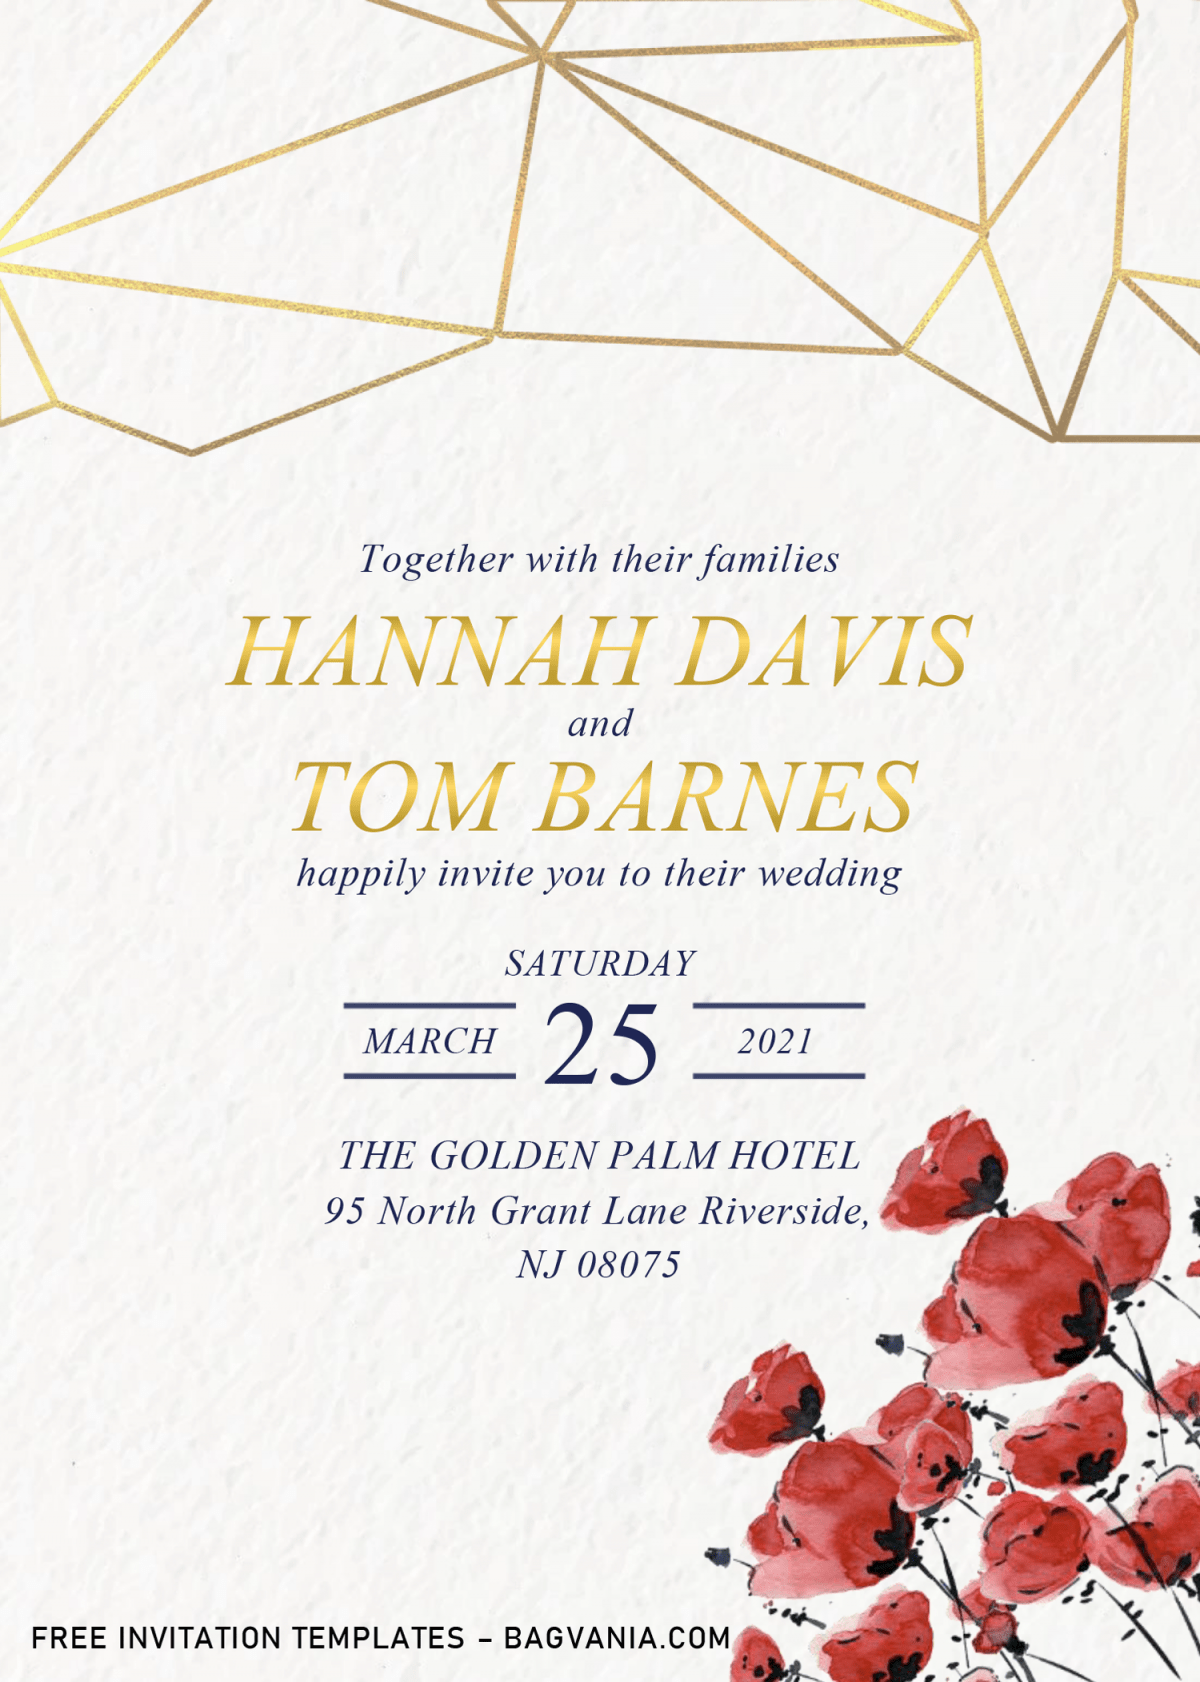 Geometric Floral Invitation Templates - Editable .Docx and has red rose